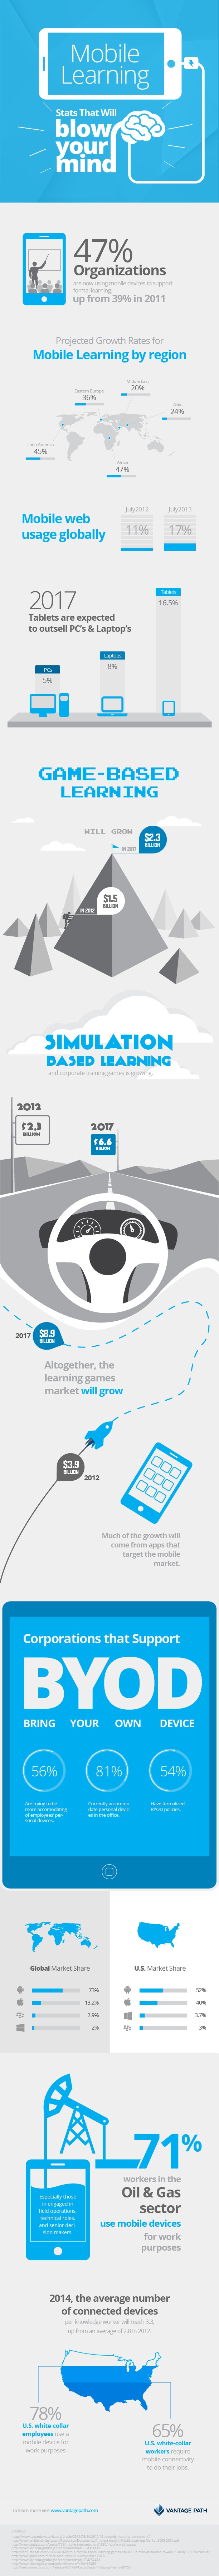 Top 9 Mobile Learning Stats Infographic